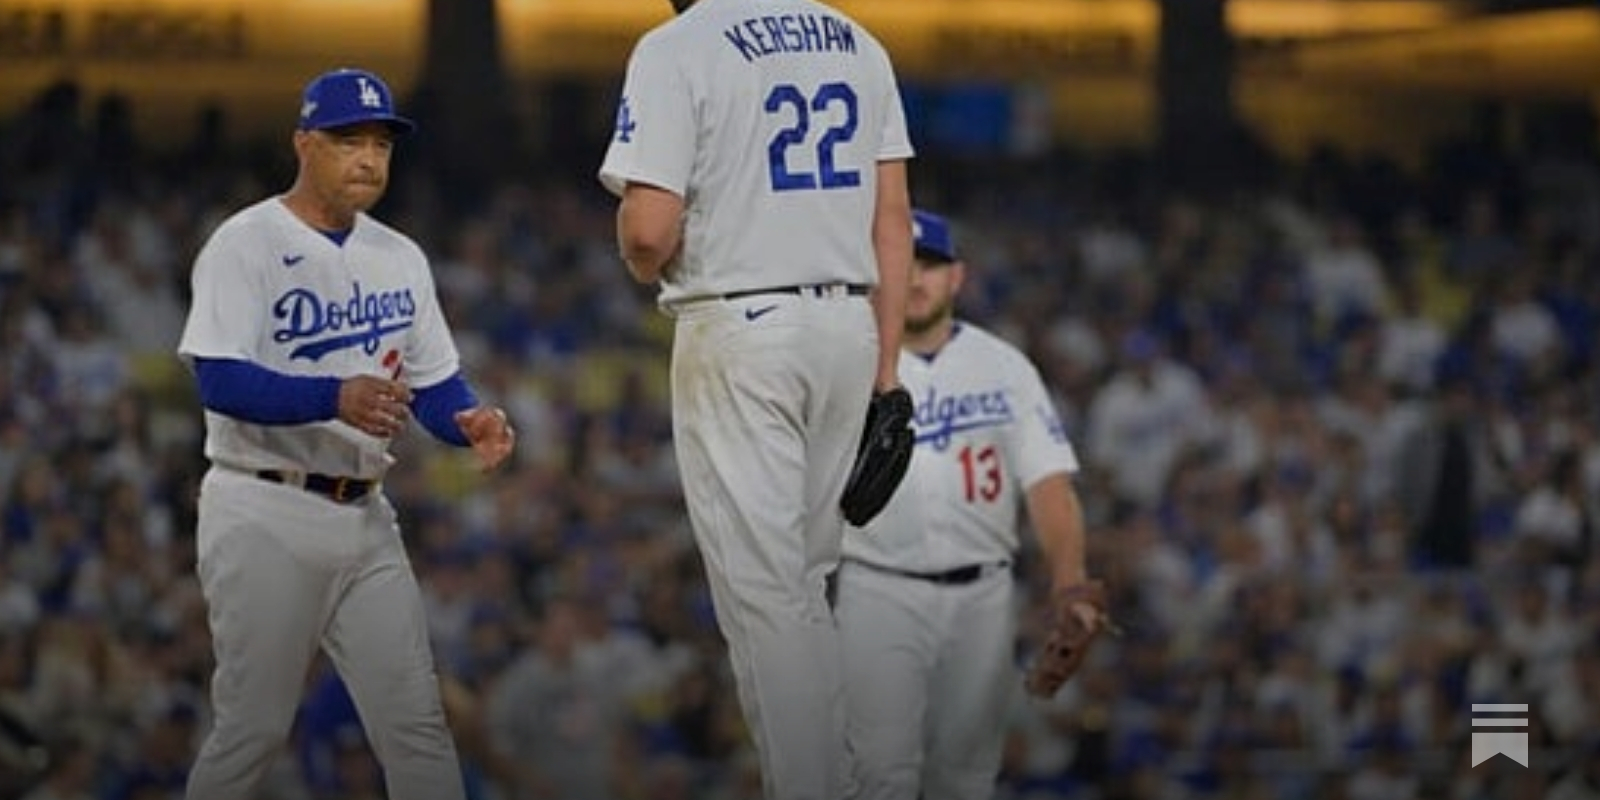 Dodgers are destined for a collapse” “NL Central is weak” - MLB fans argue  over National League midsummer standings